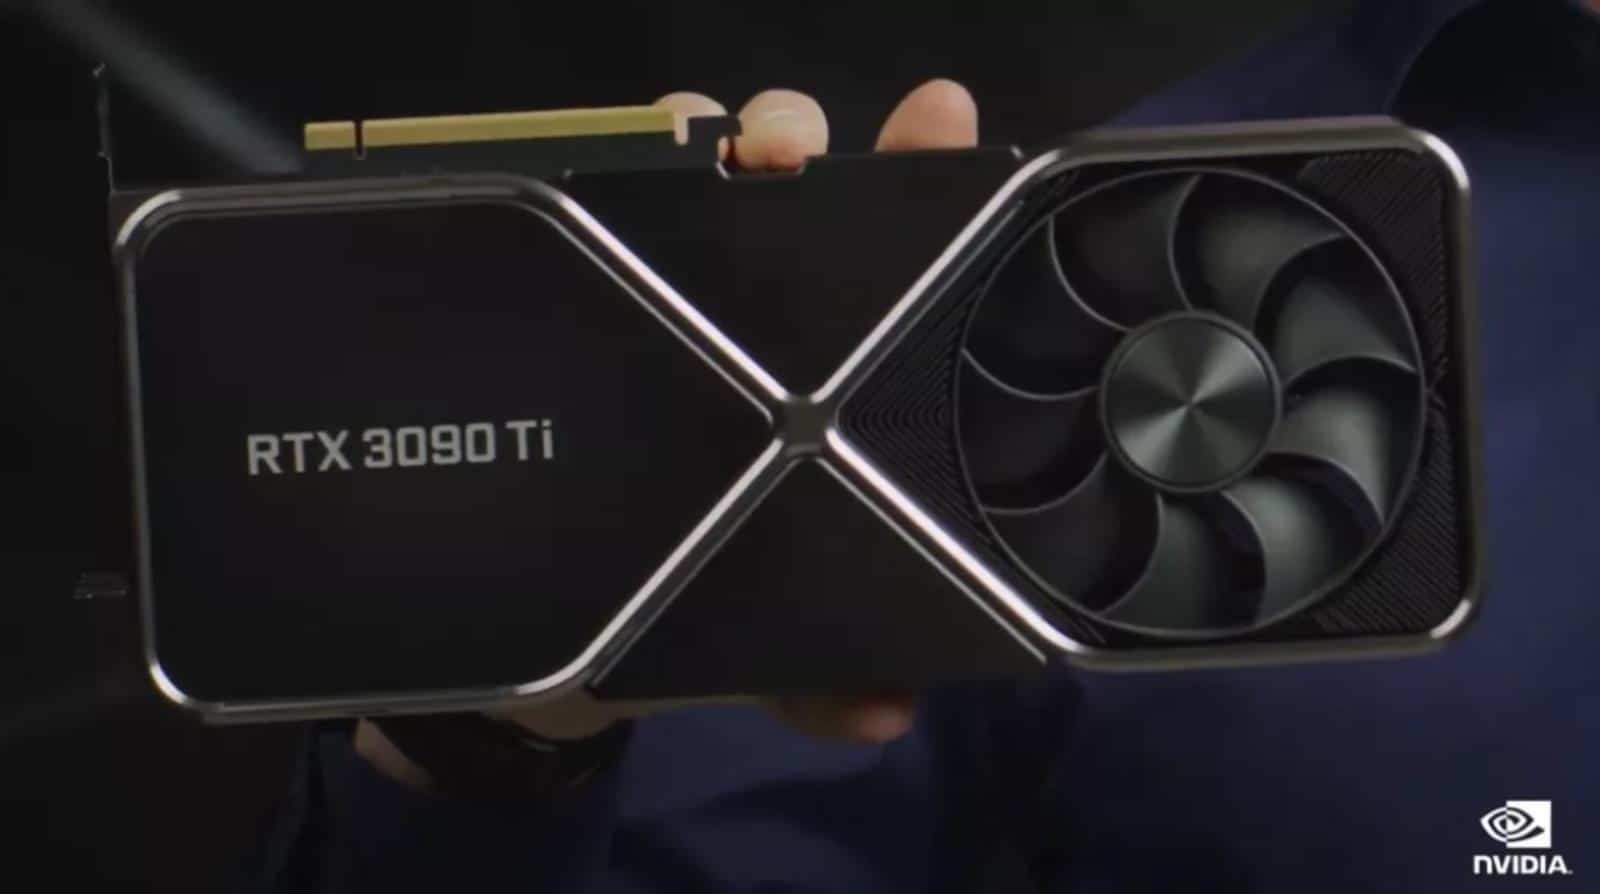 It is already February, and the GeForce RTX 3090 Ti is not there